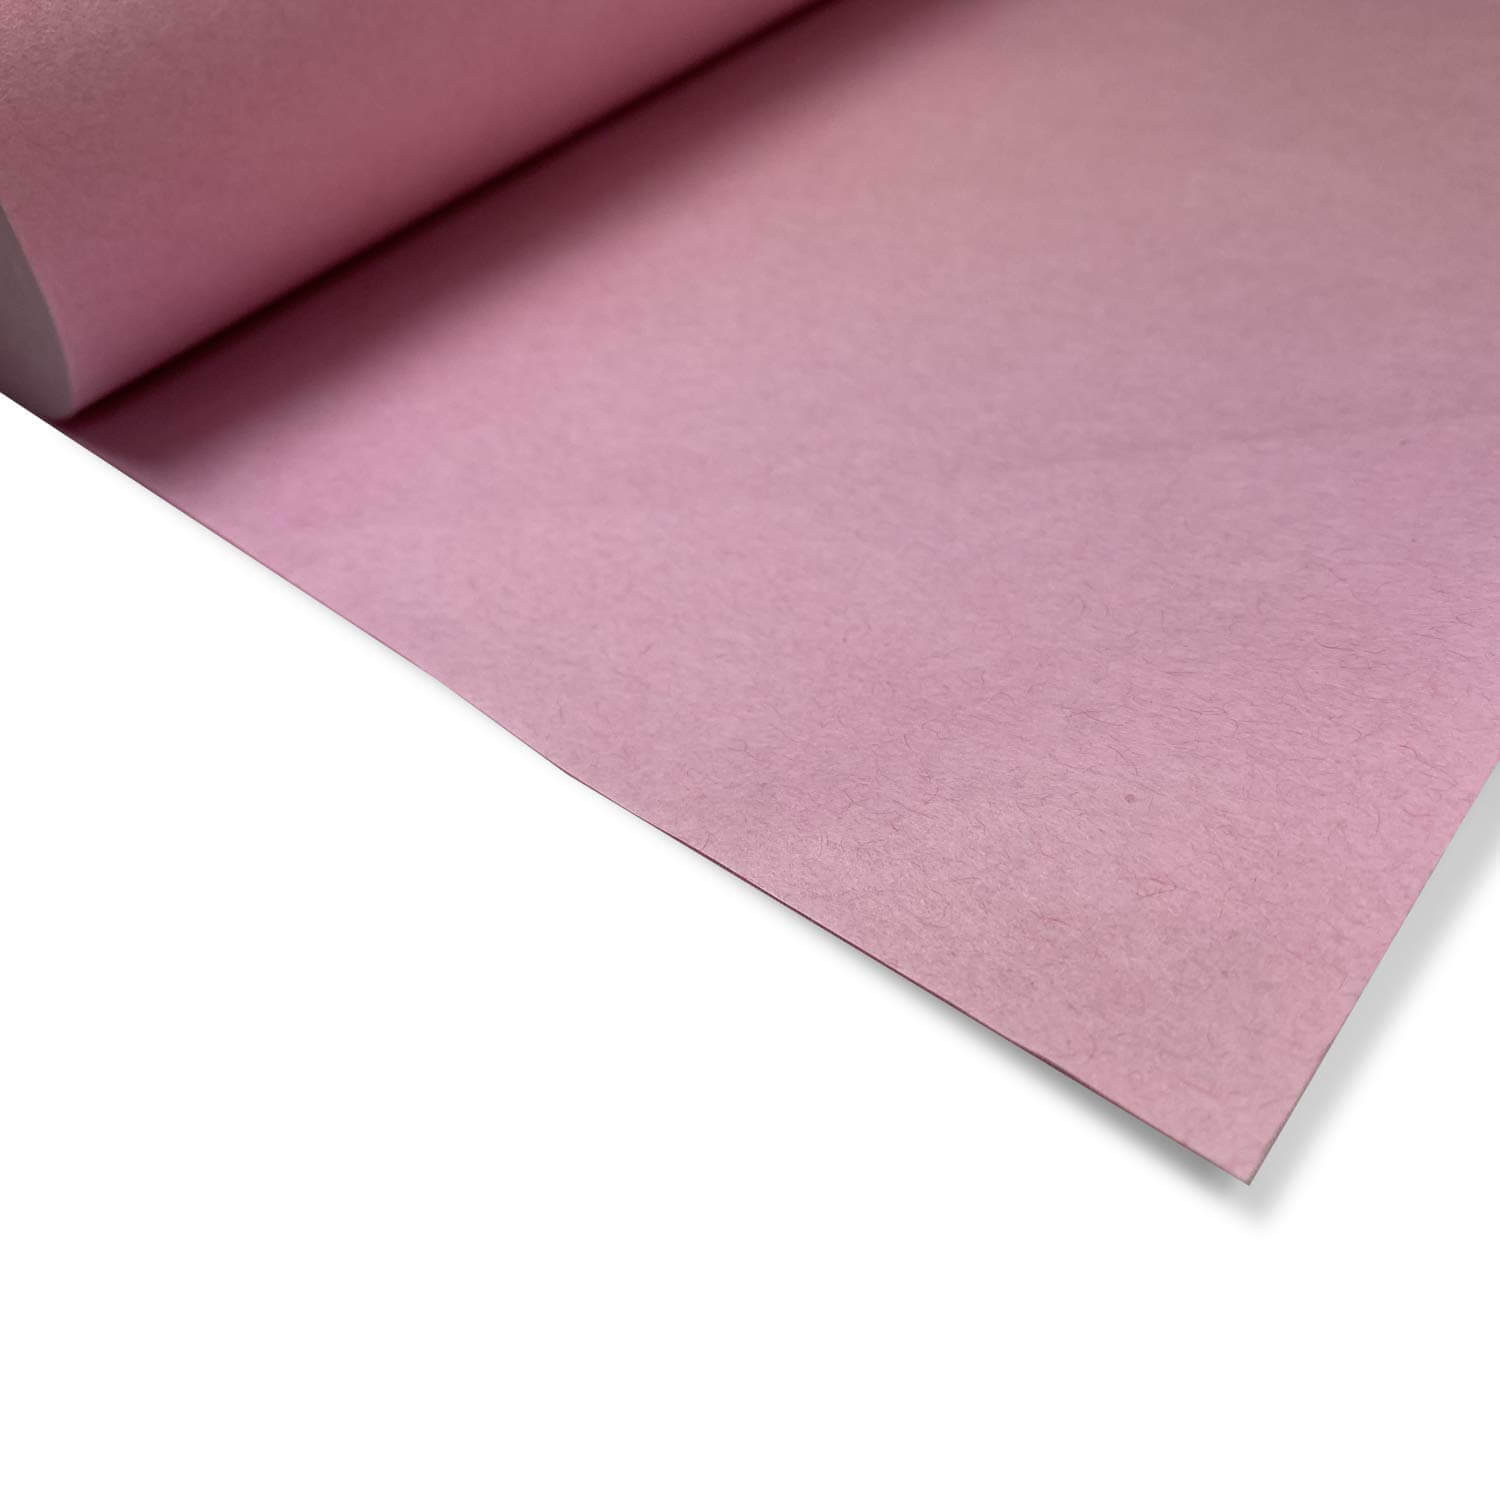 https://idlpack.com/image/cache/catalog/Products/Kraft-Paper/Pink-Butcher-Paper/Pink-Butcher-Paper-Roll-for-Smoking-and-Packing-Meat-and-Fish-1500x1500.jpg